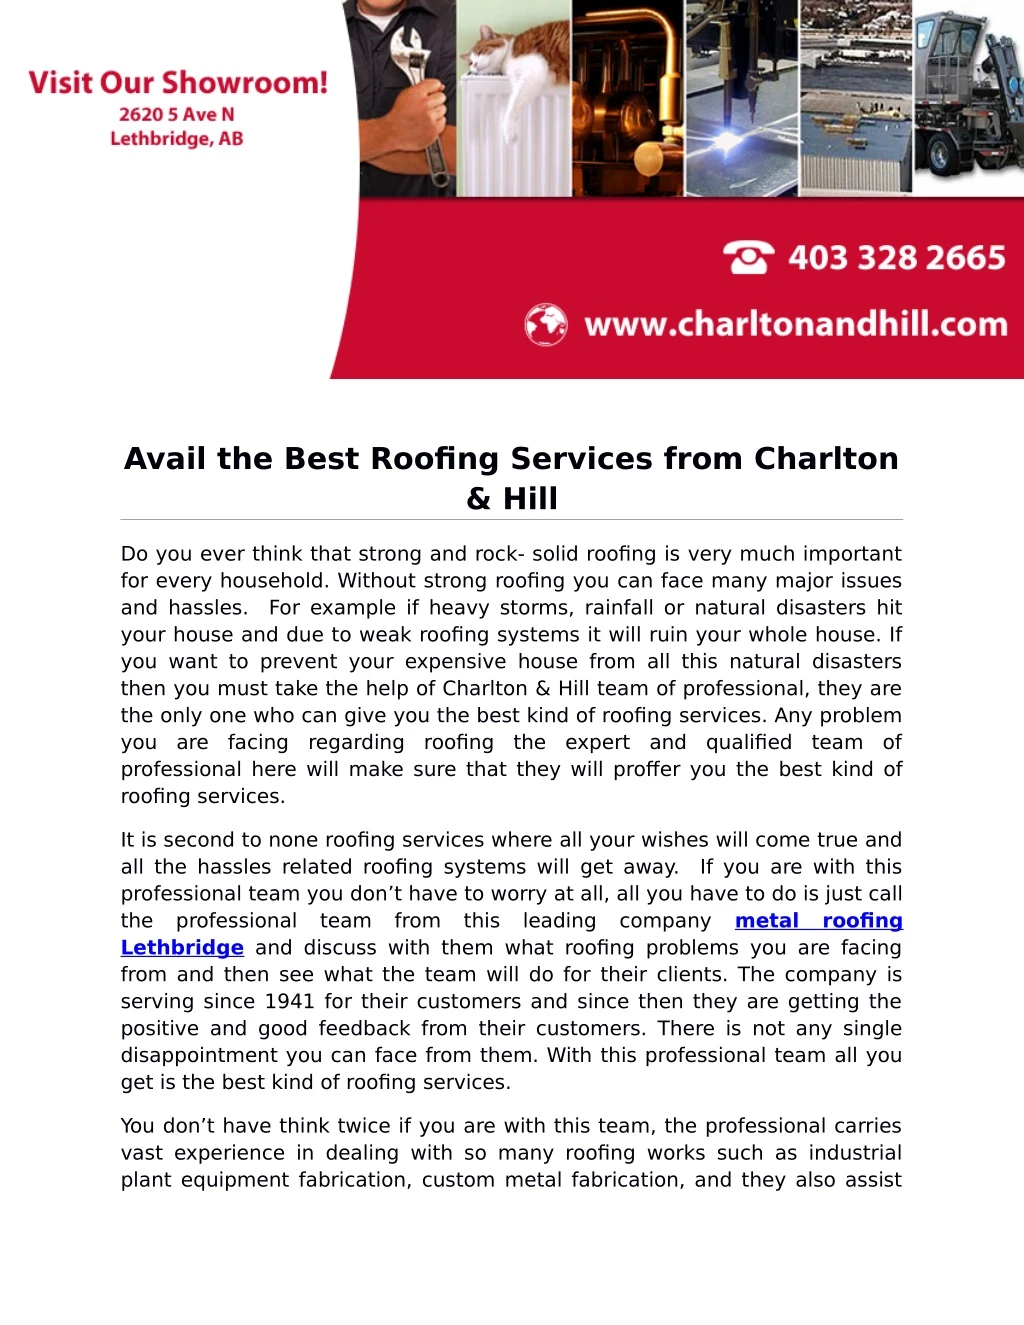 avail the best roofing services from charlton hill